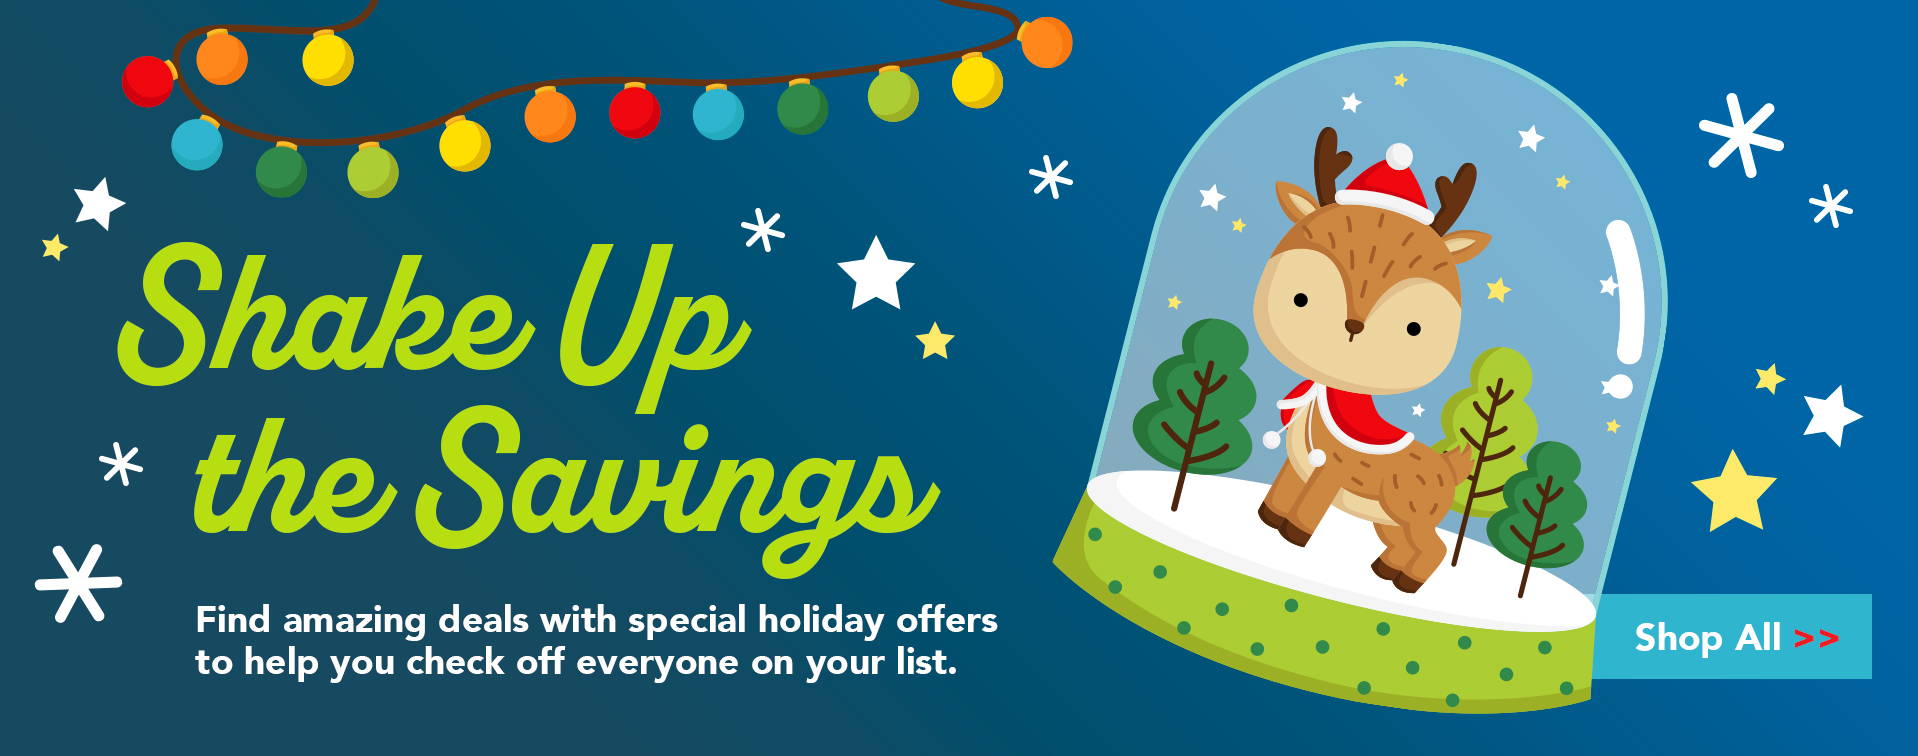 Shake Up the Savings! Find amazing deals with special holiday offers to help you check off everyone on your list. Shop All.